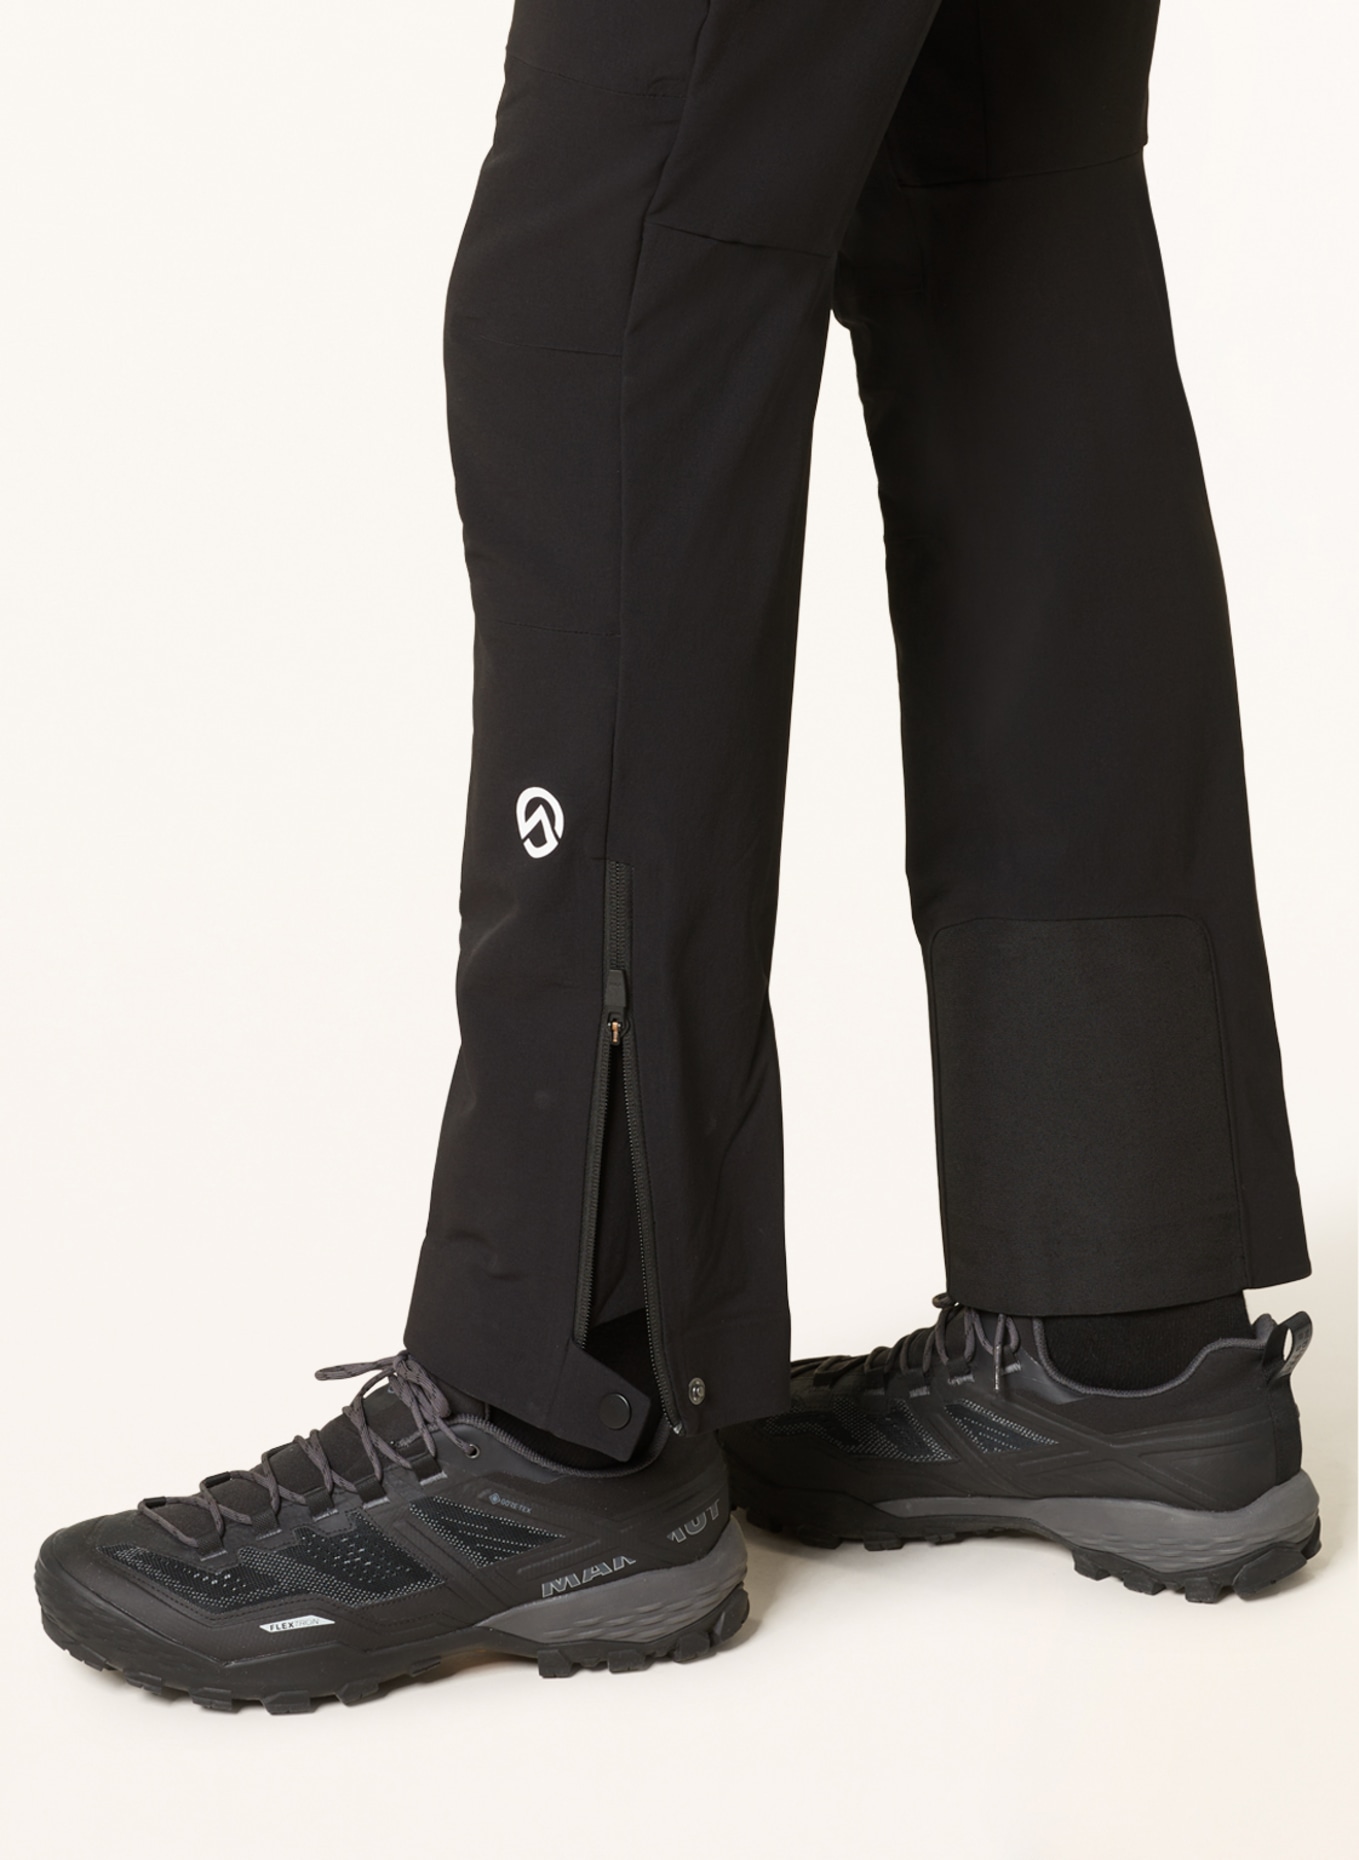 Men's Reflective Hiking Pants Waterproof Softshell Trousers with Fleece -  China Sports Wear and Hiking Pants price | Made-in-China.com